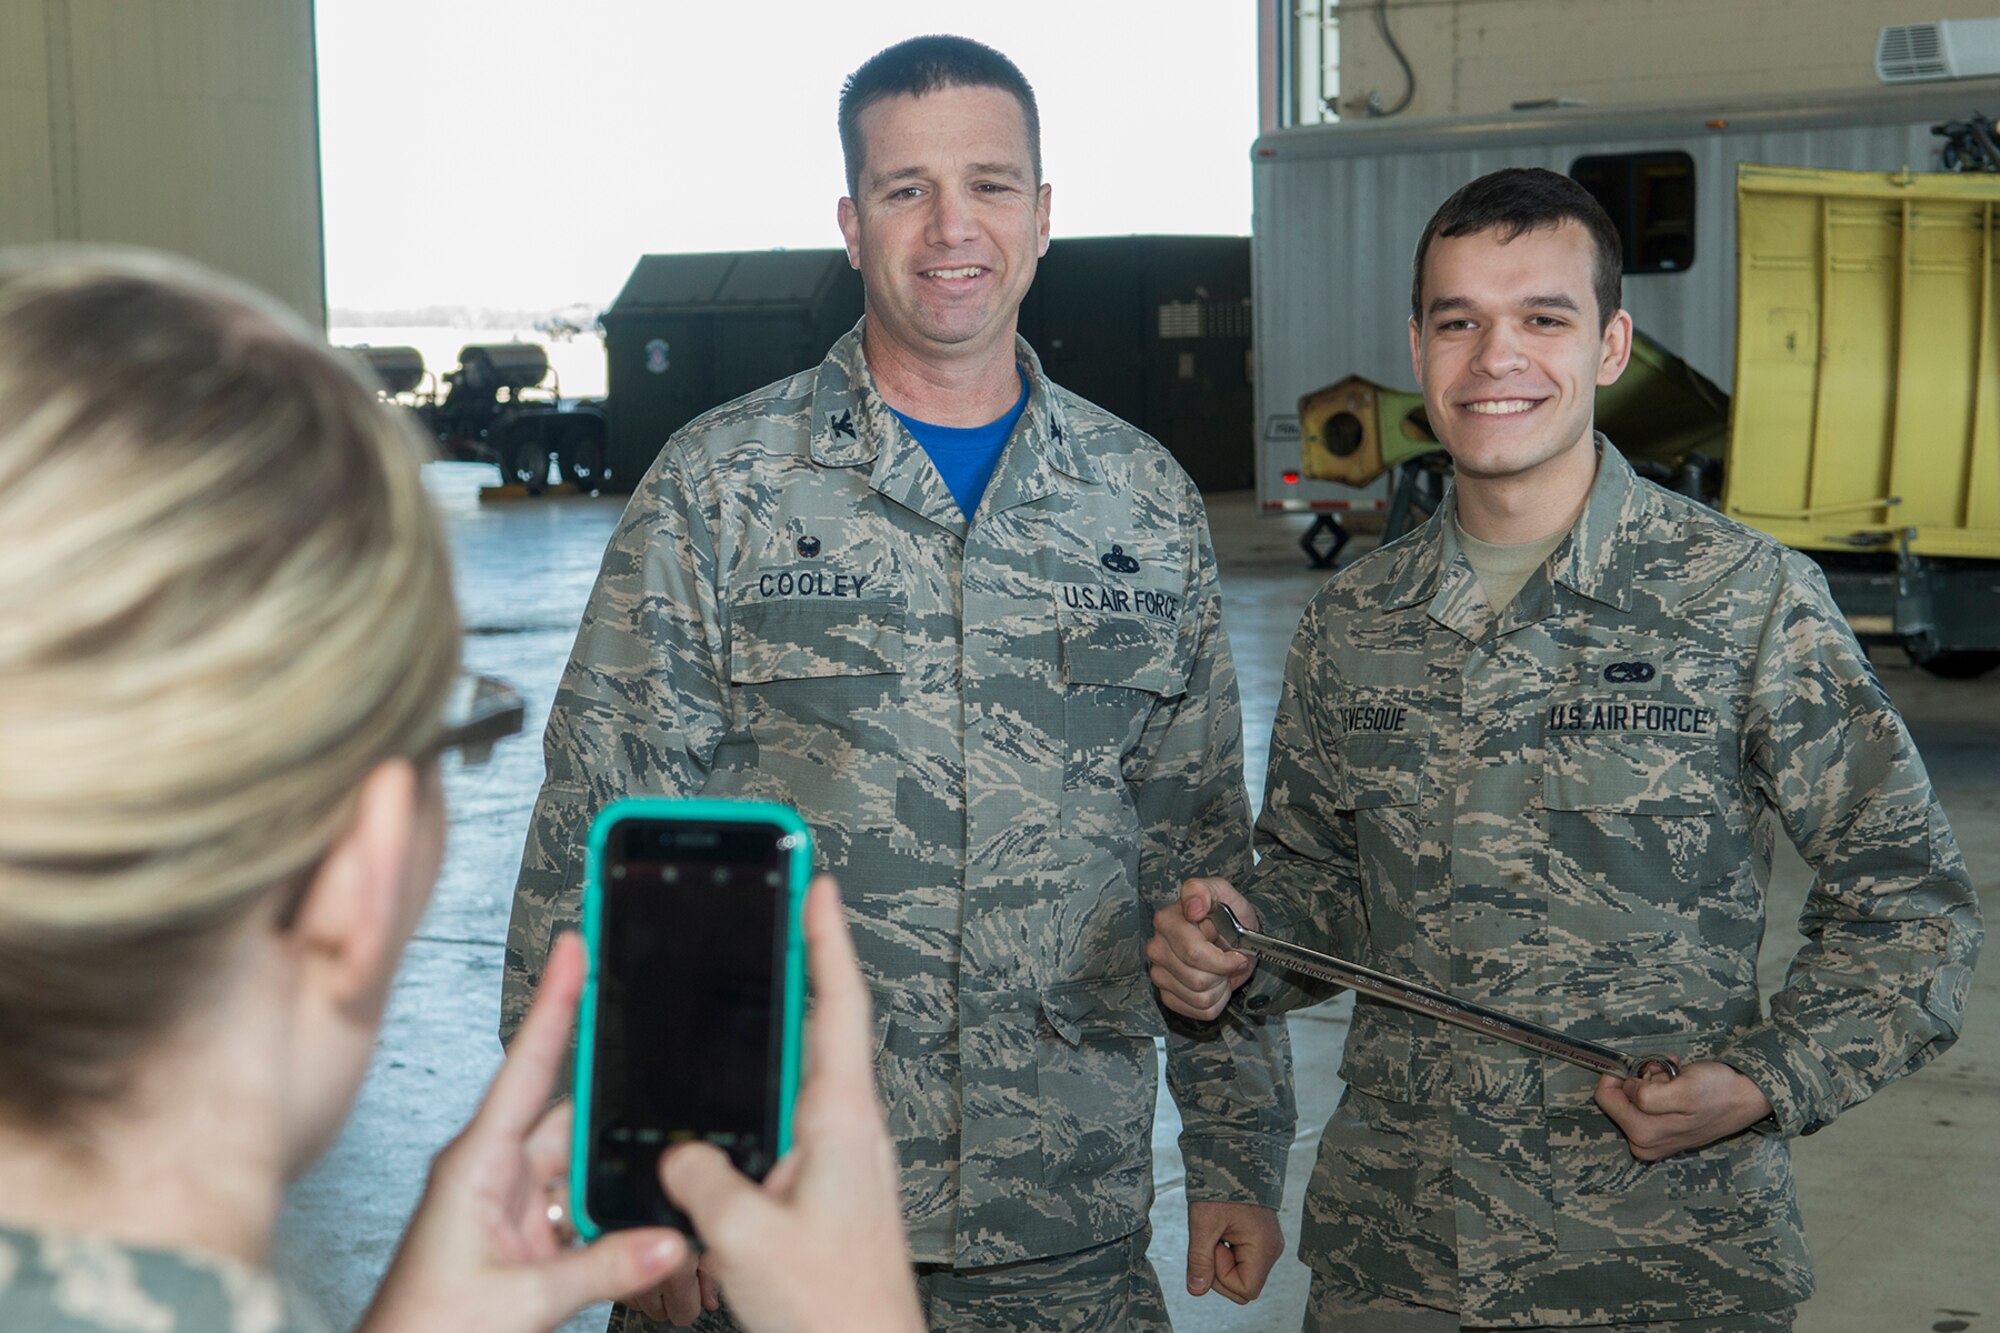 U.S. Air Force Senior Airman Tyler Levesque poses for a picture with Col. Casey Cooley, 307th Maintenance Group commander, after receiving the “Knuckle Buster” award on Jan. 25, 2019, Barksdale Air Force Base, Louisiana. Levesque is assigned to the 2nd Maintenance Squadron and received the award for discovering that two control cables (the Lateral Control cable and the Drag Chute cable) on a B-52H Stratofortress were improperly routed. (U.S. Air Force photo by Greg Steele)